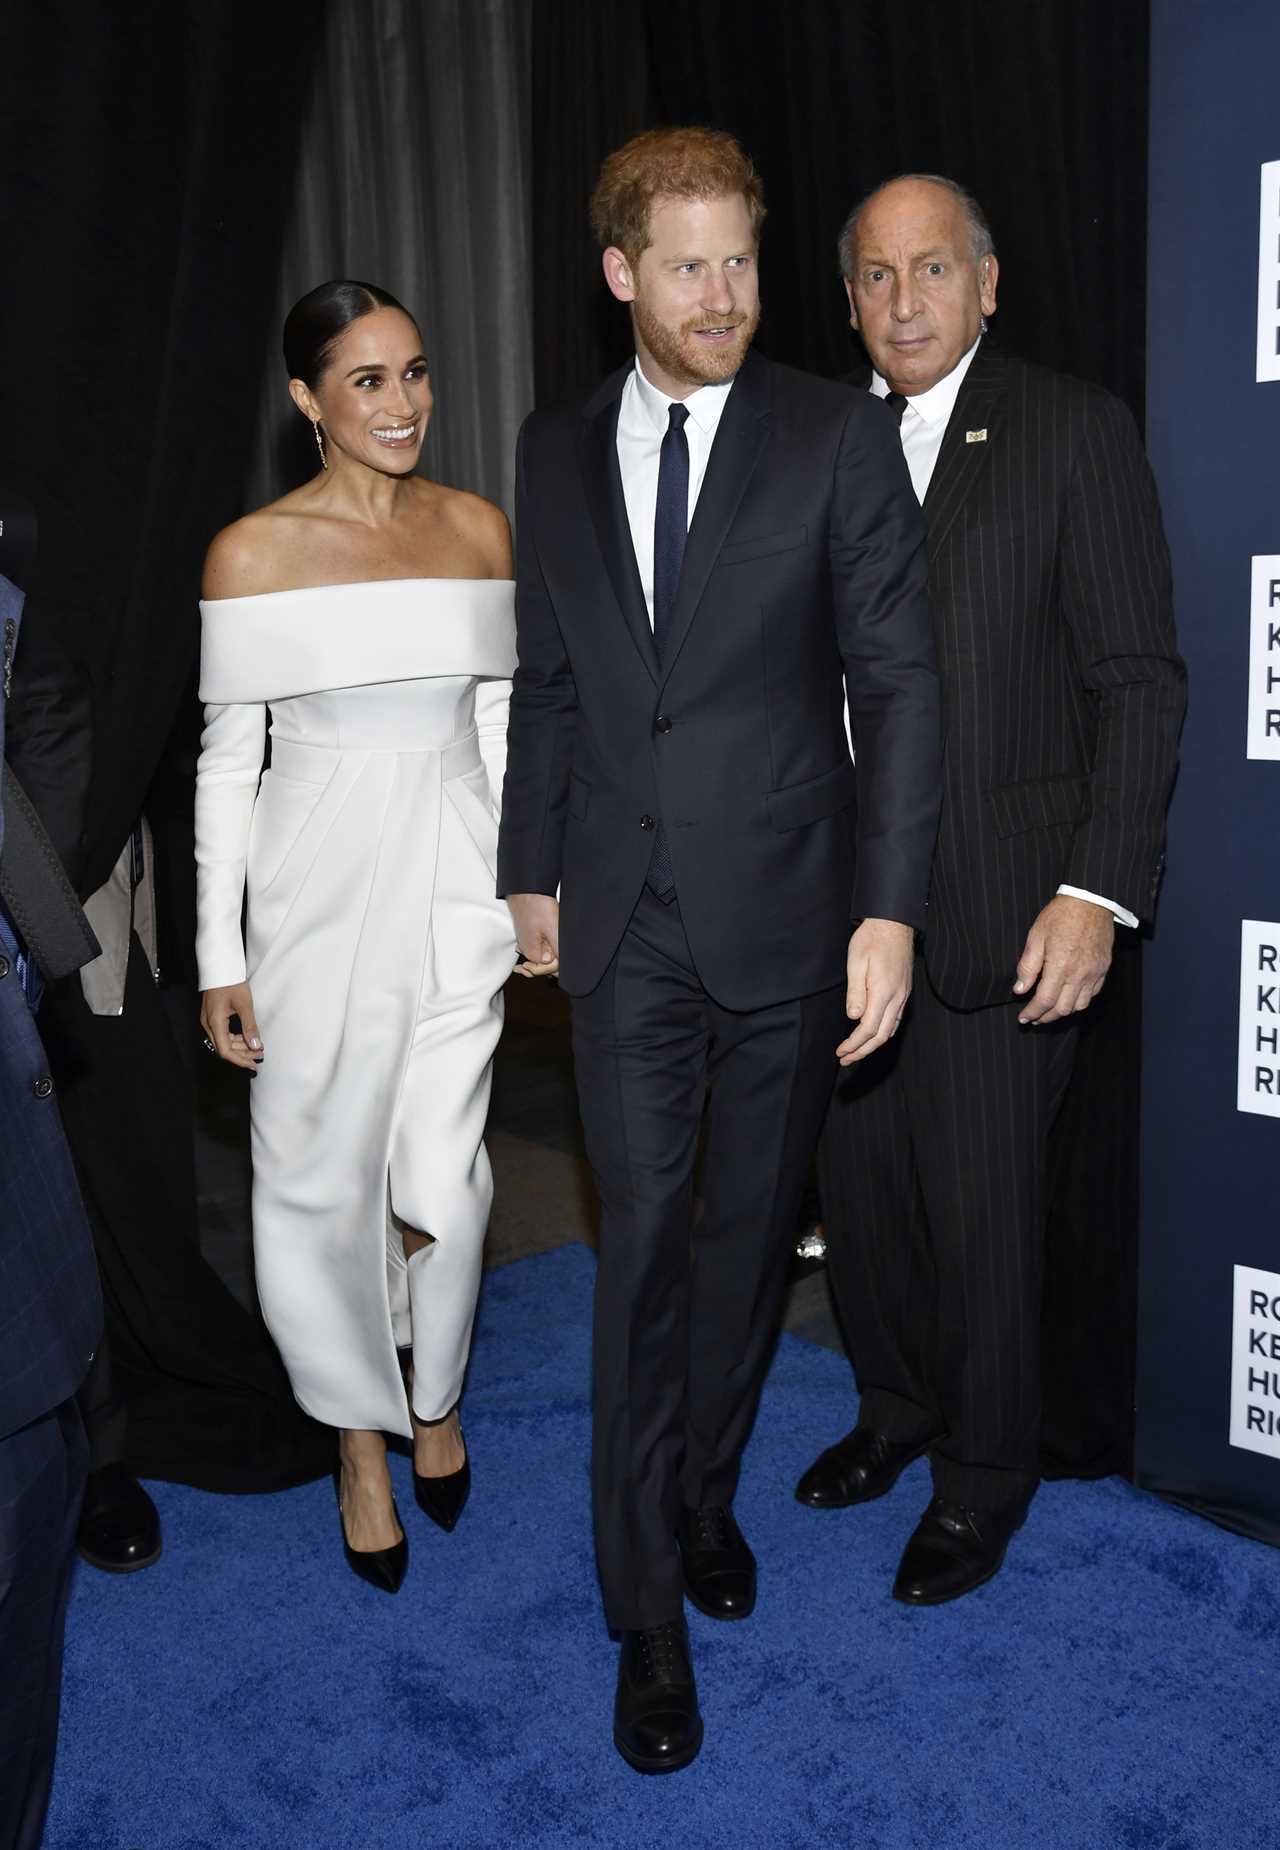 Meghan Markle wears strapless white dress to accept ‘anti-racism’ award with suited Prince Harry ahead of Netflix doc